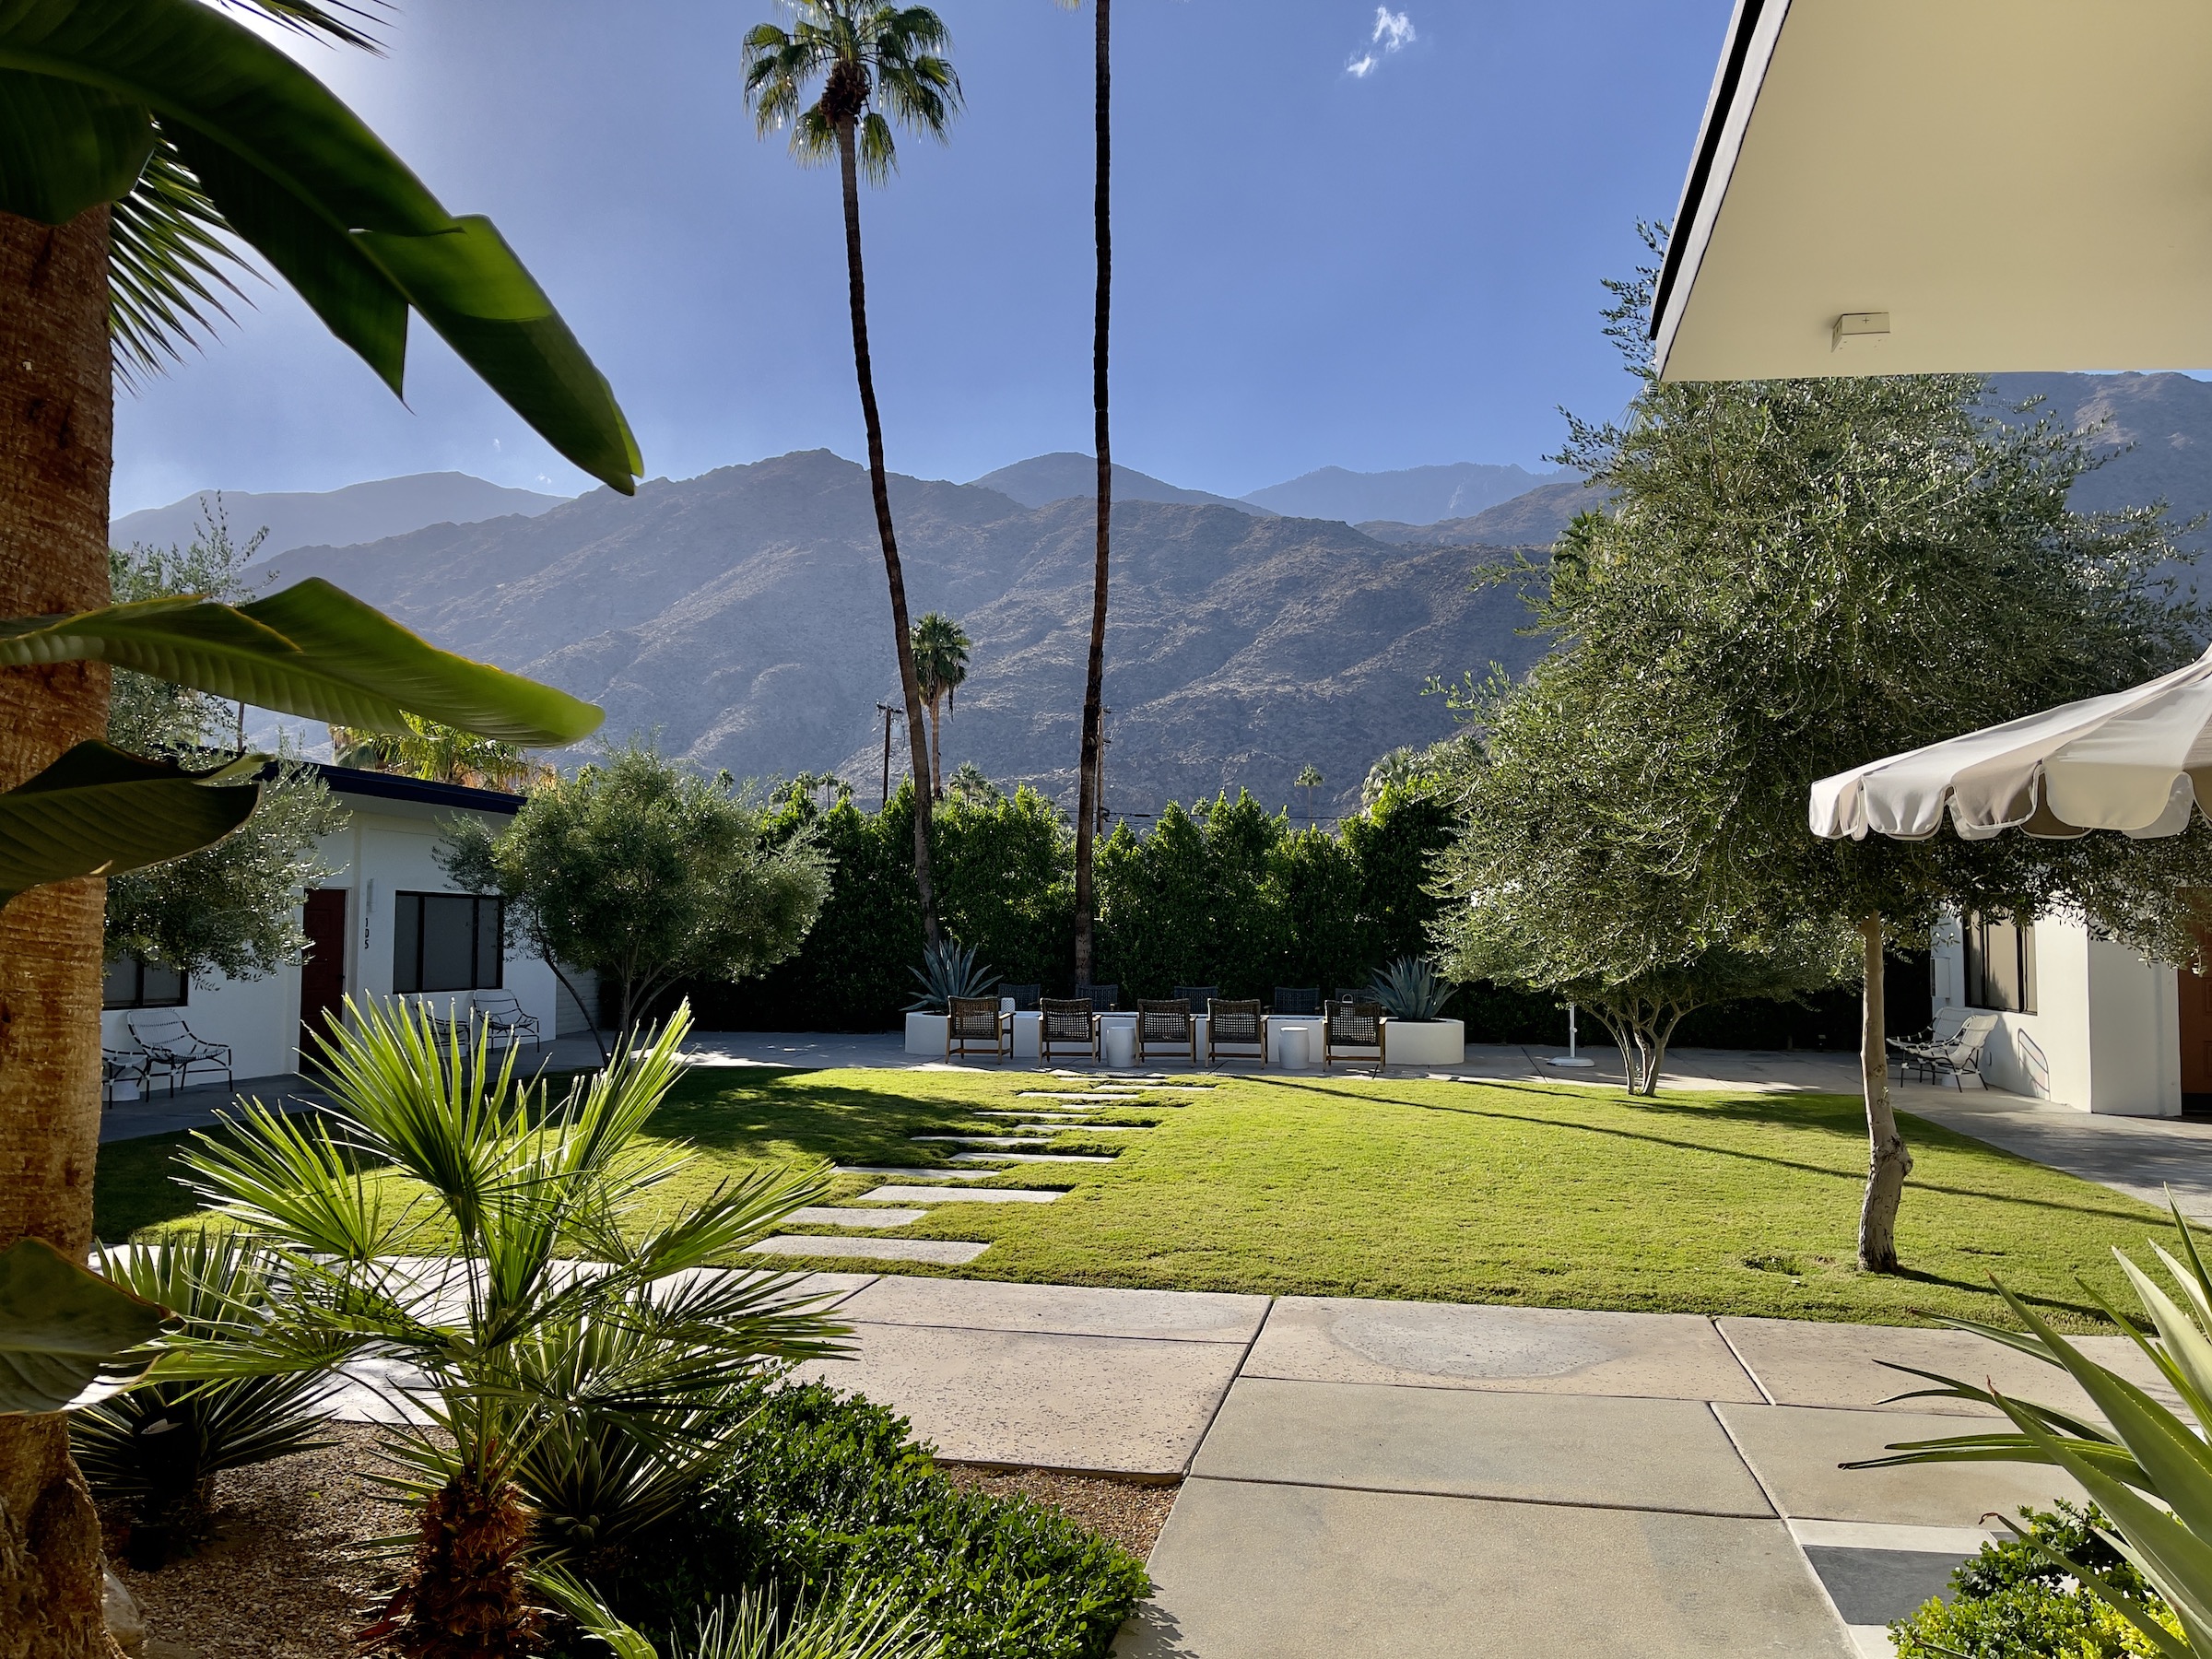 The grassy courtyard area at the Azure Sky boutique hotel in Palm Springs, California